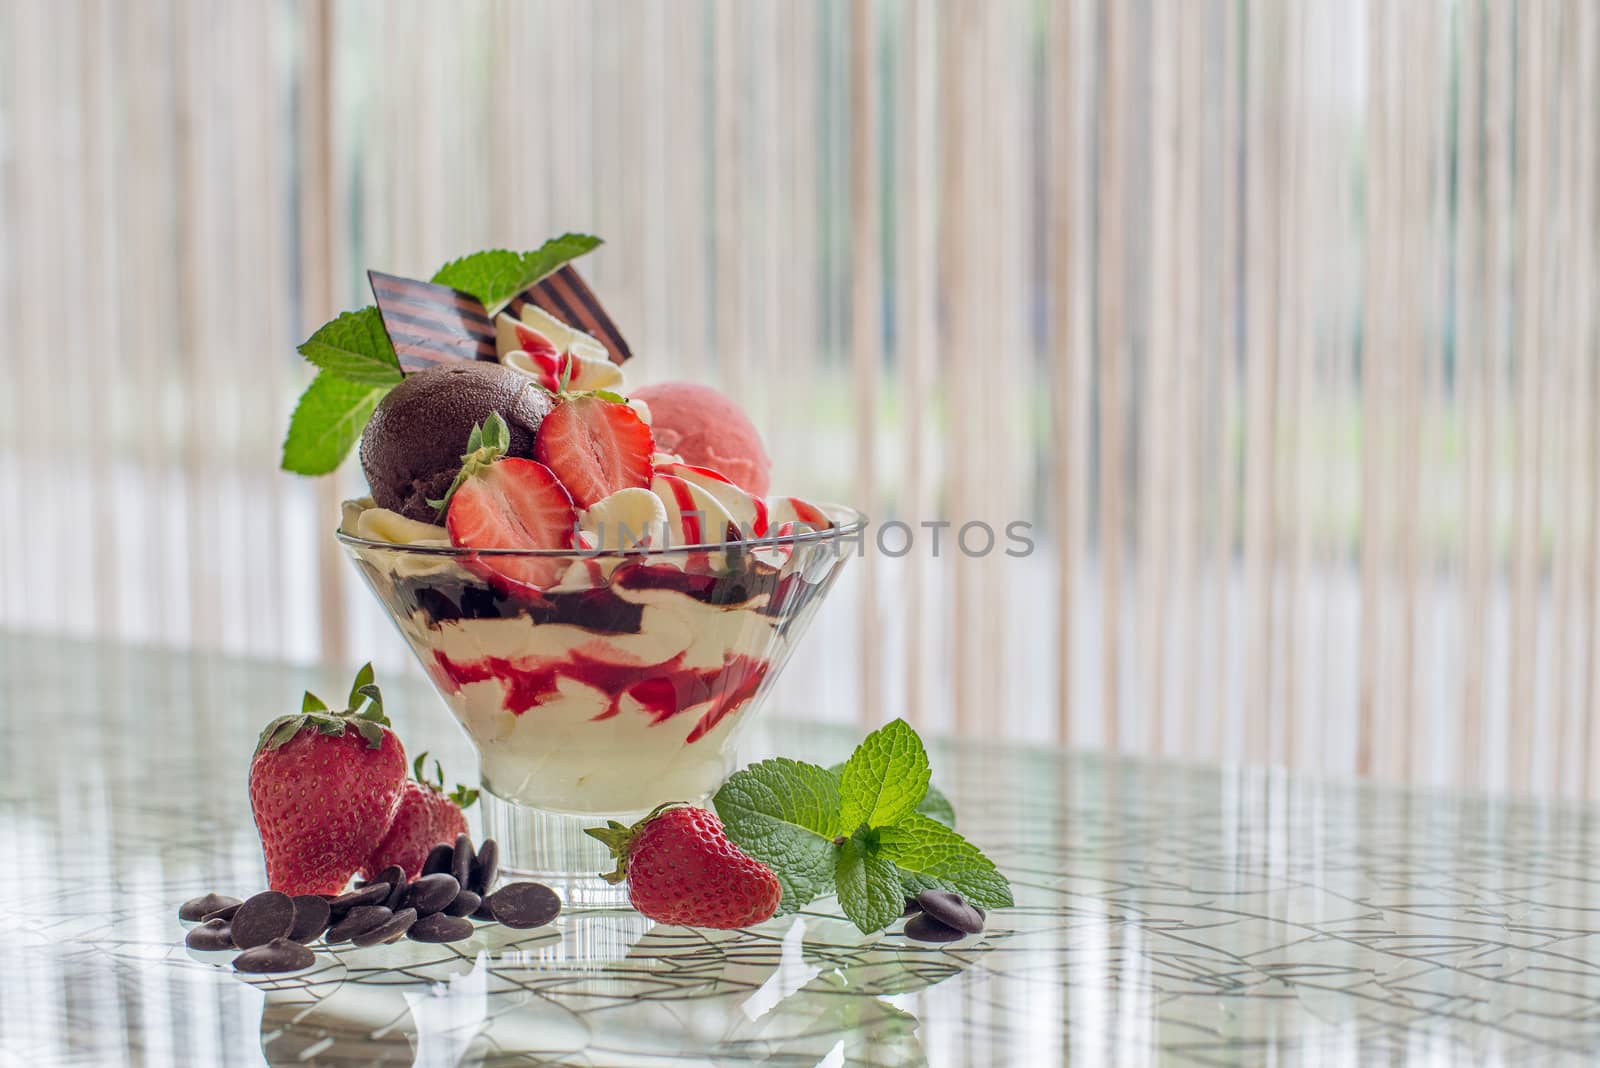 Delicious strawberry dessert with mint and chocolate